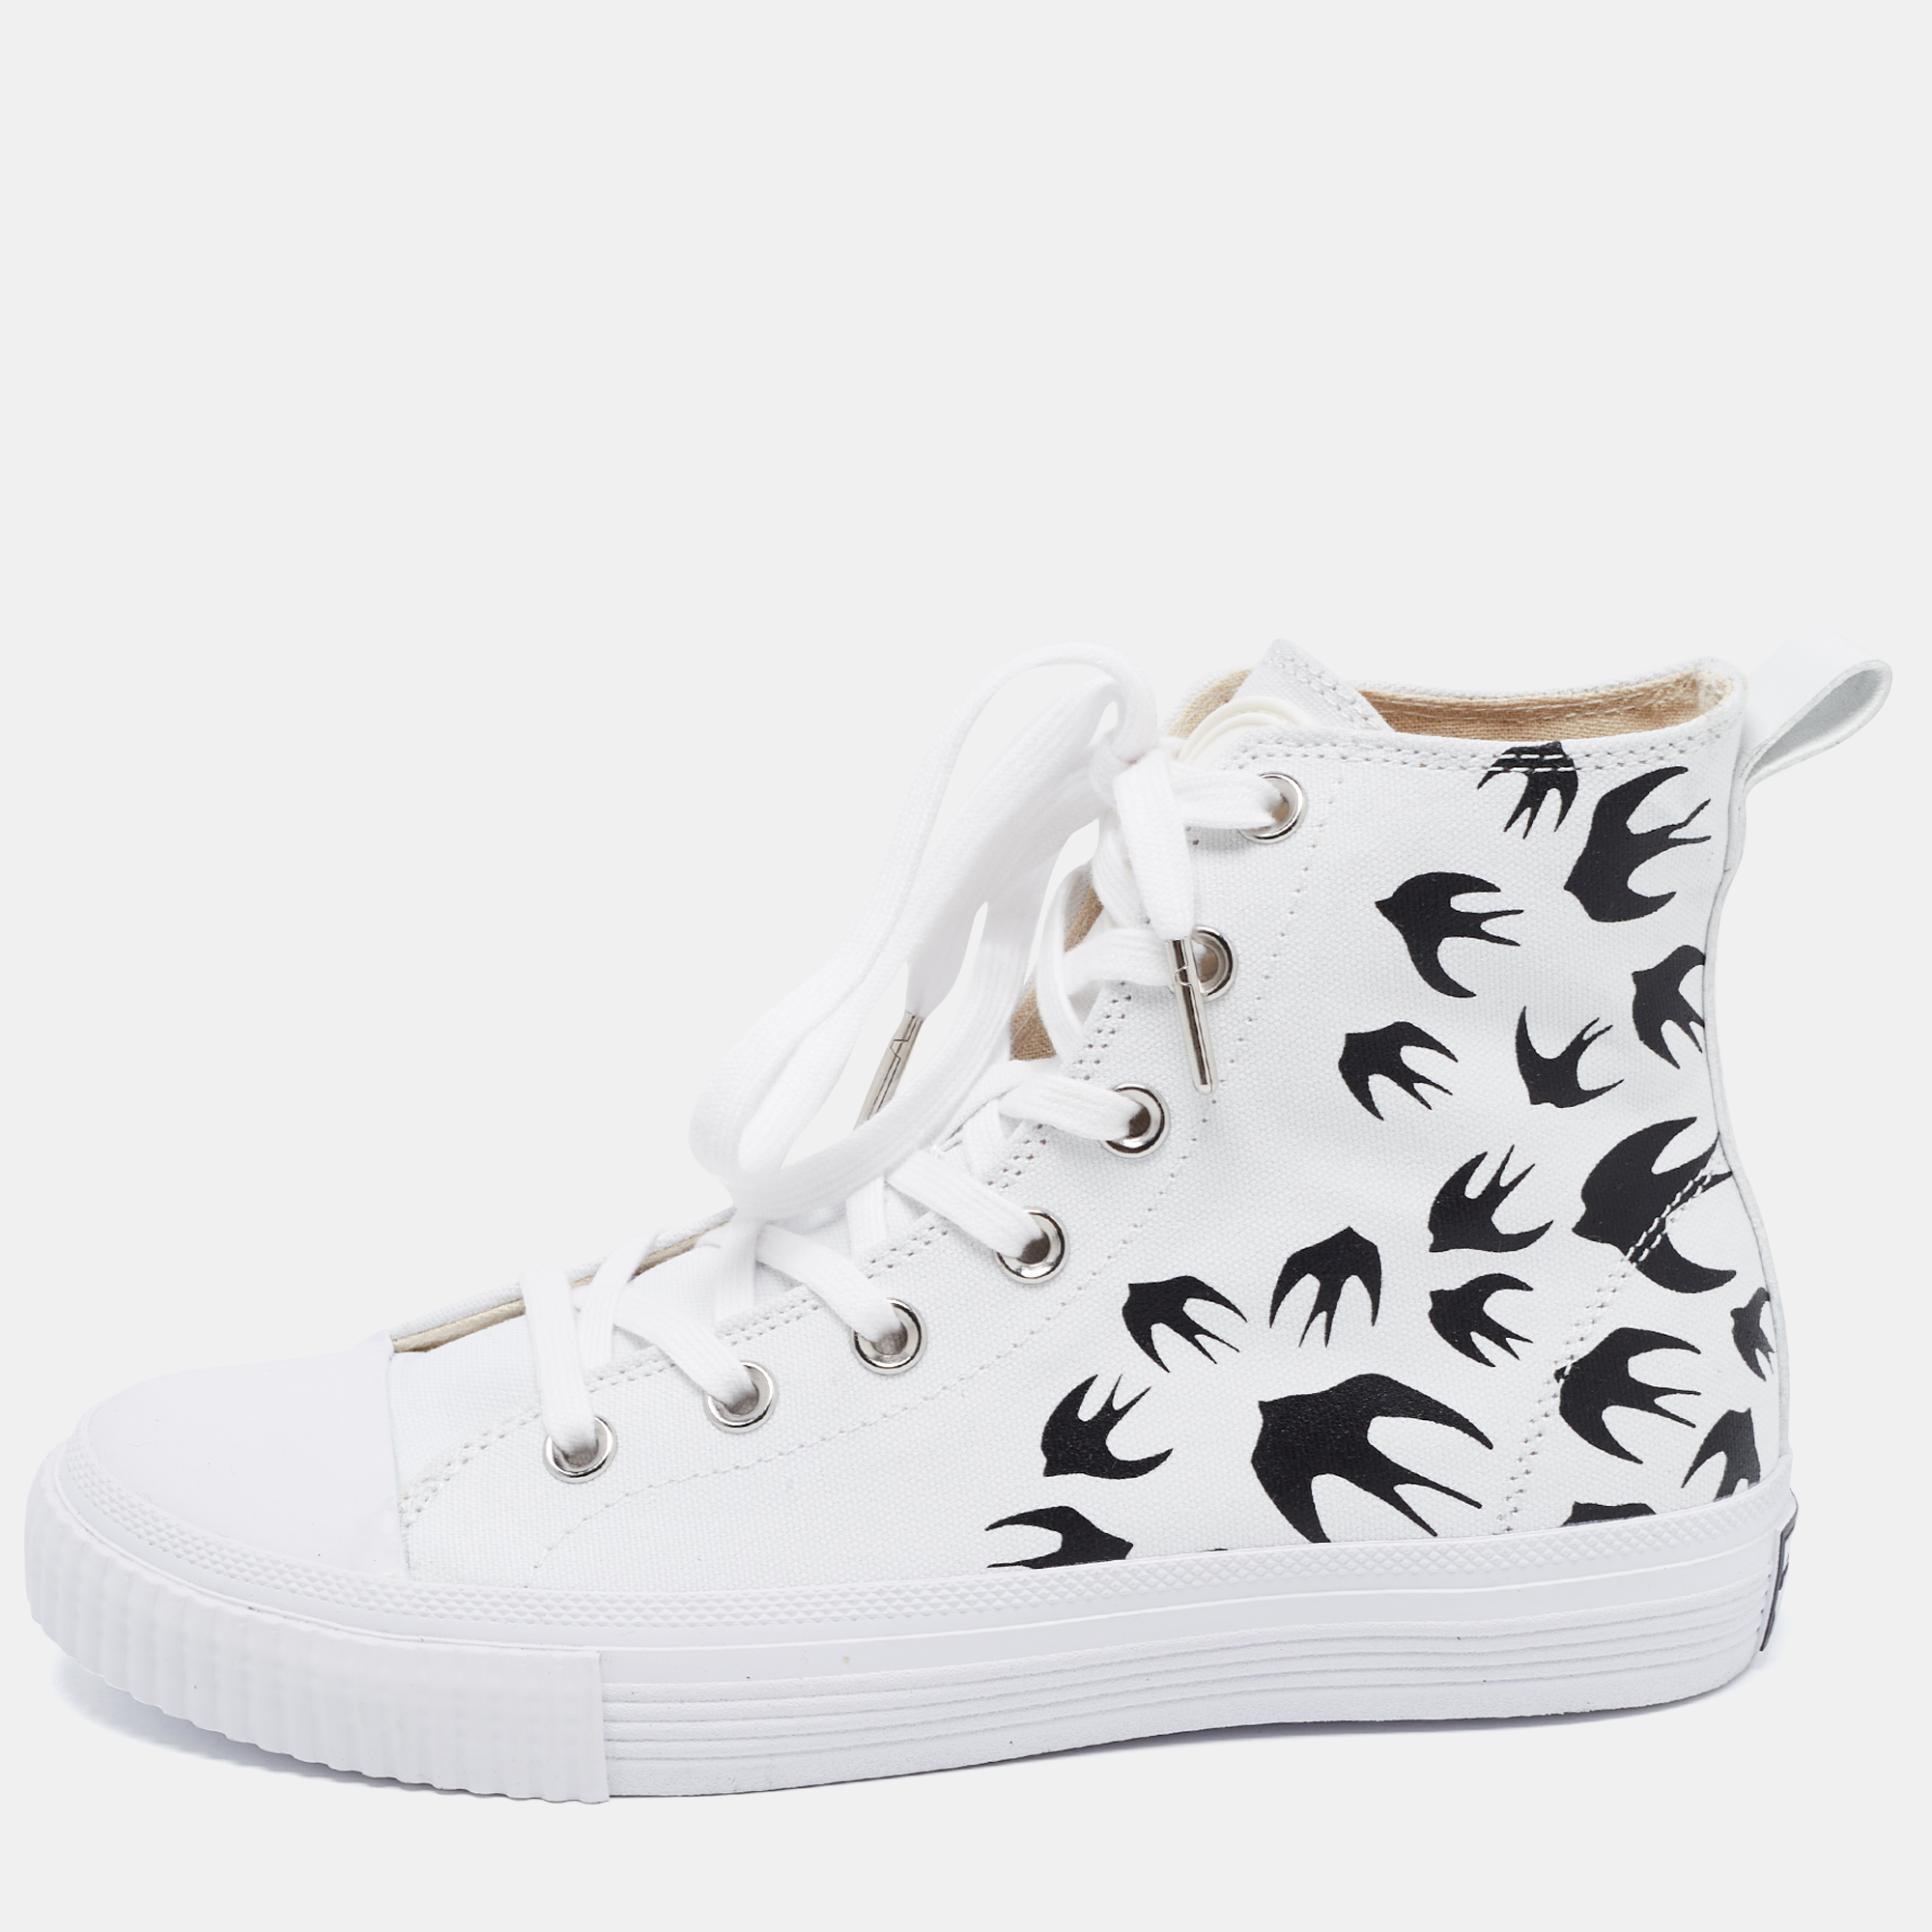 Pre-owned Mcq By Alexander Mcqueen Mcq White Canvas Swallow Plimsoll High Top Sneakers Size 39